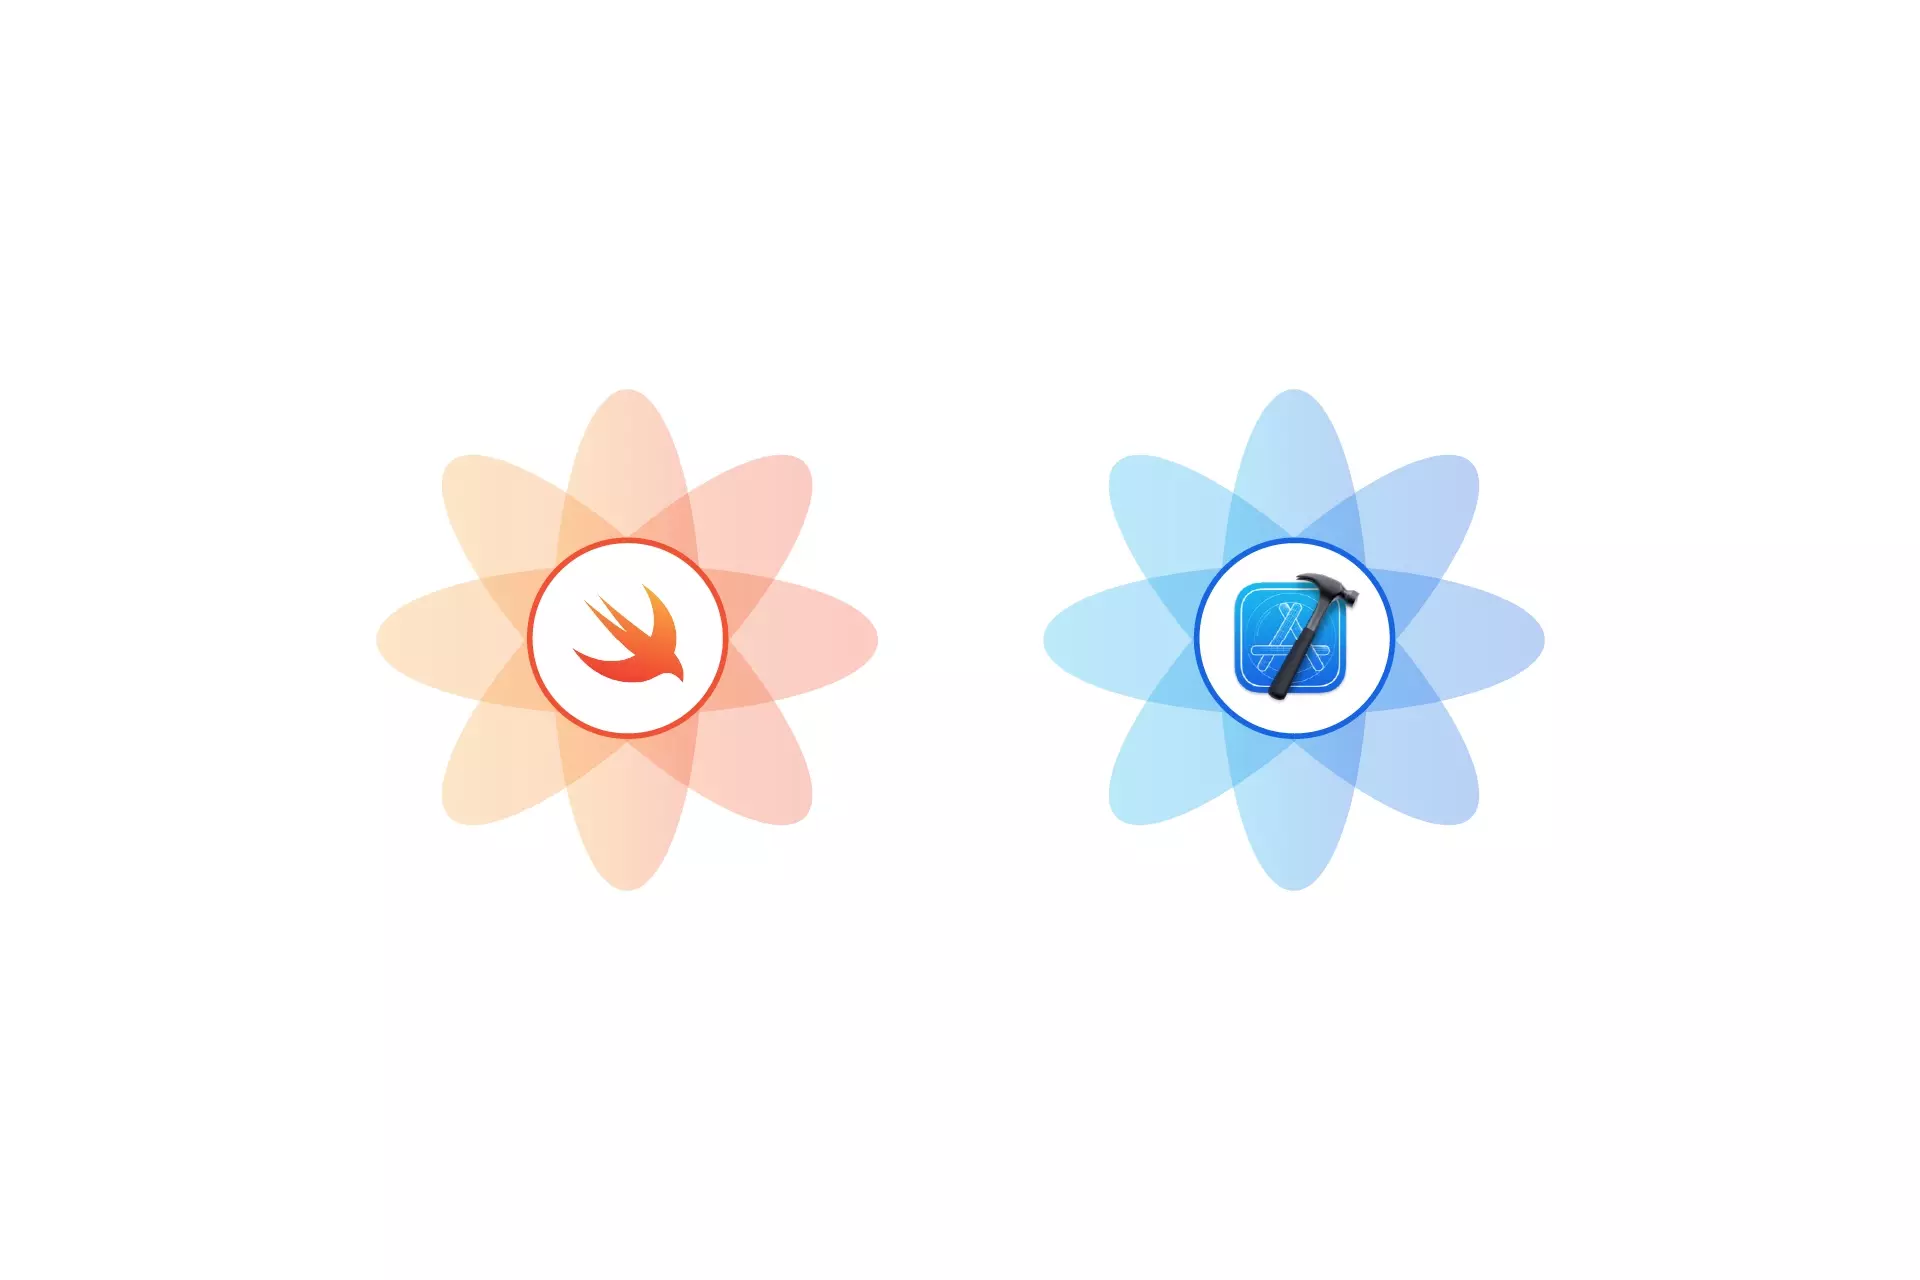 Two flowers that represent Swift and Xcode.